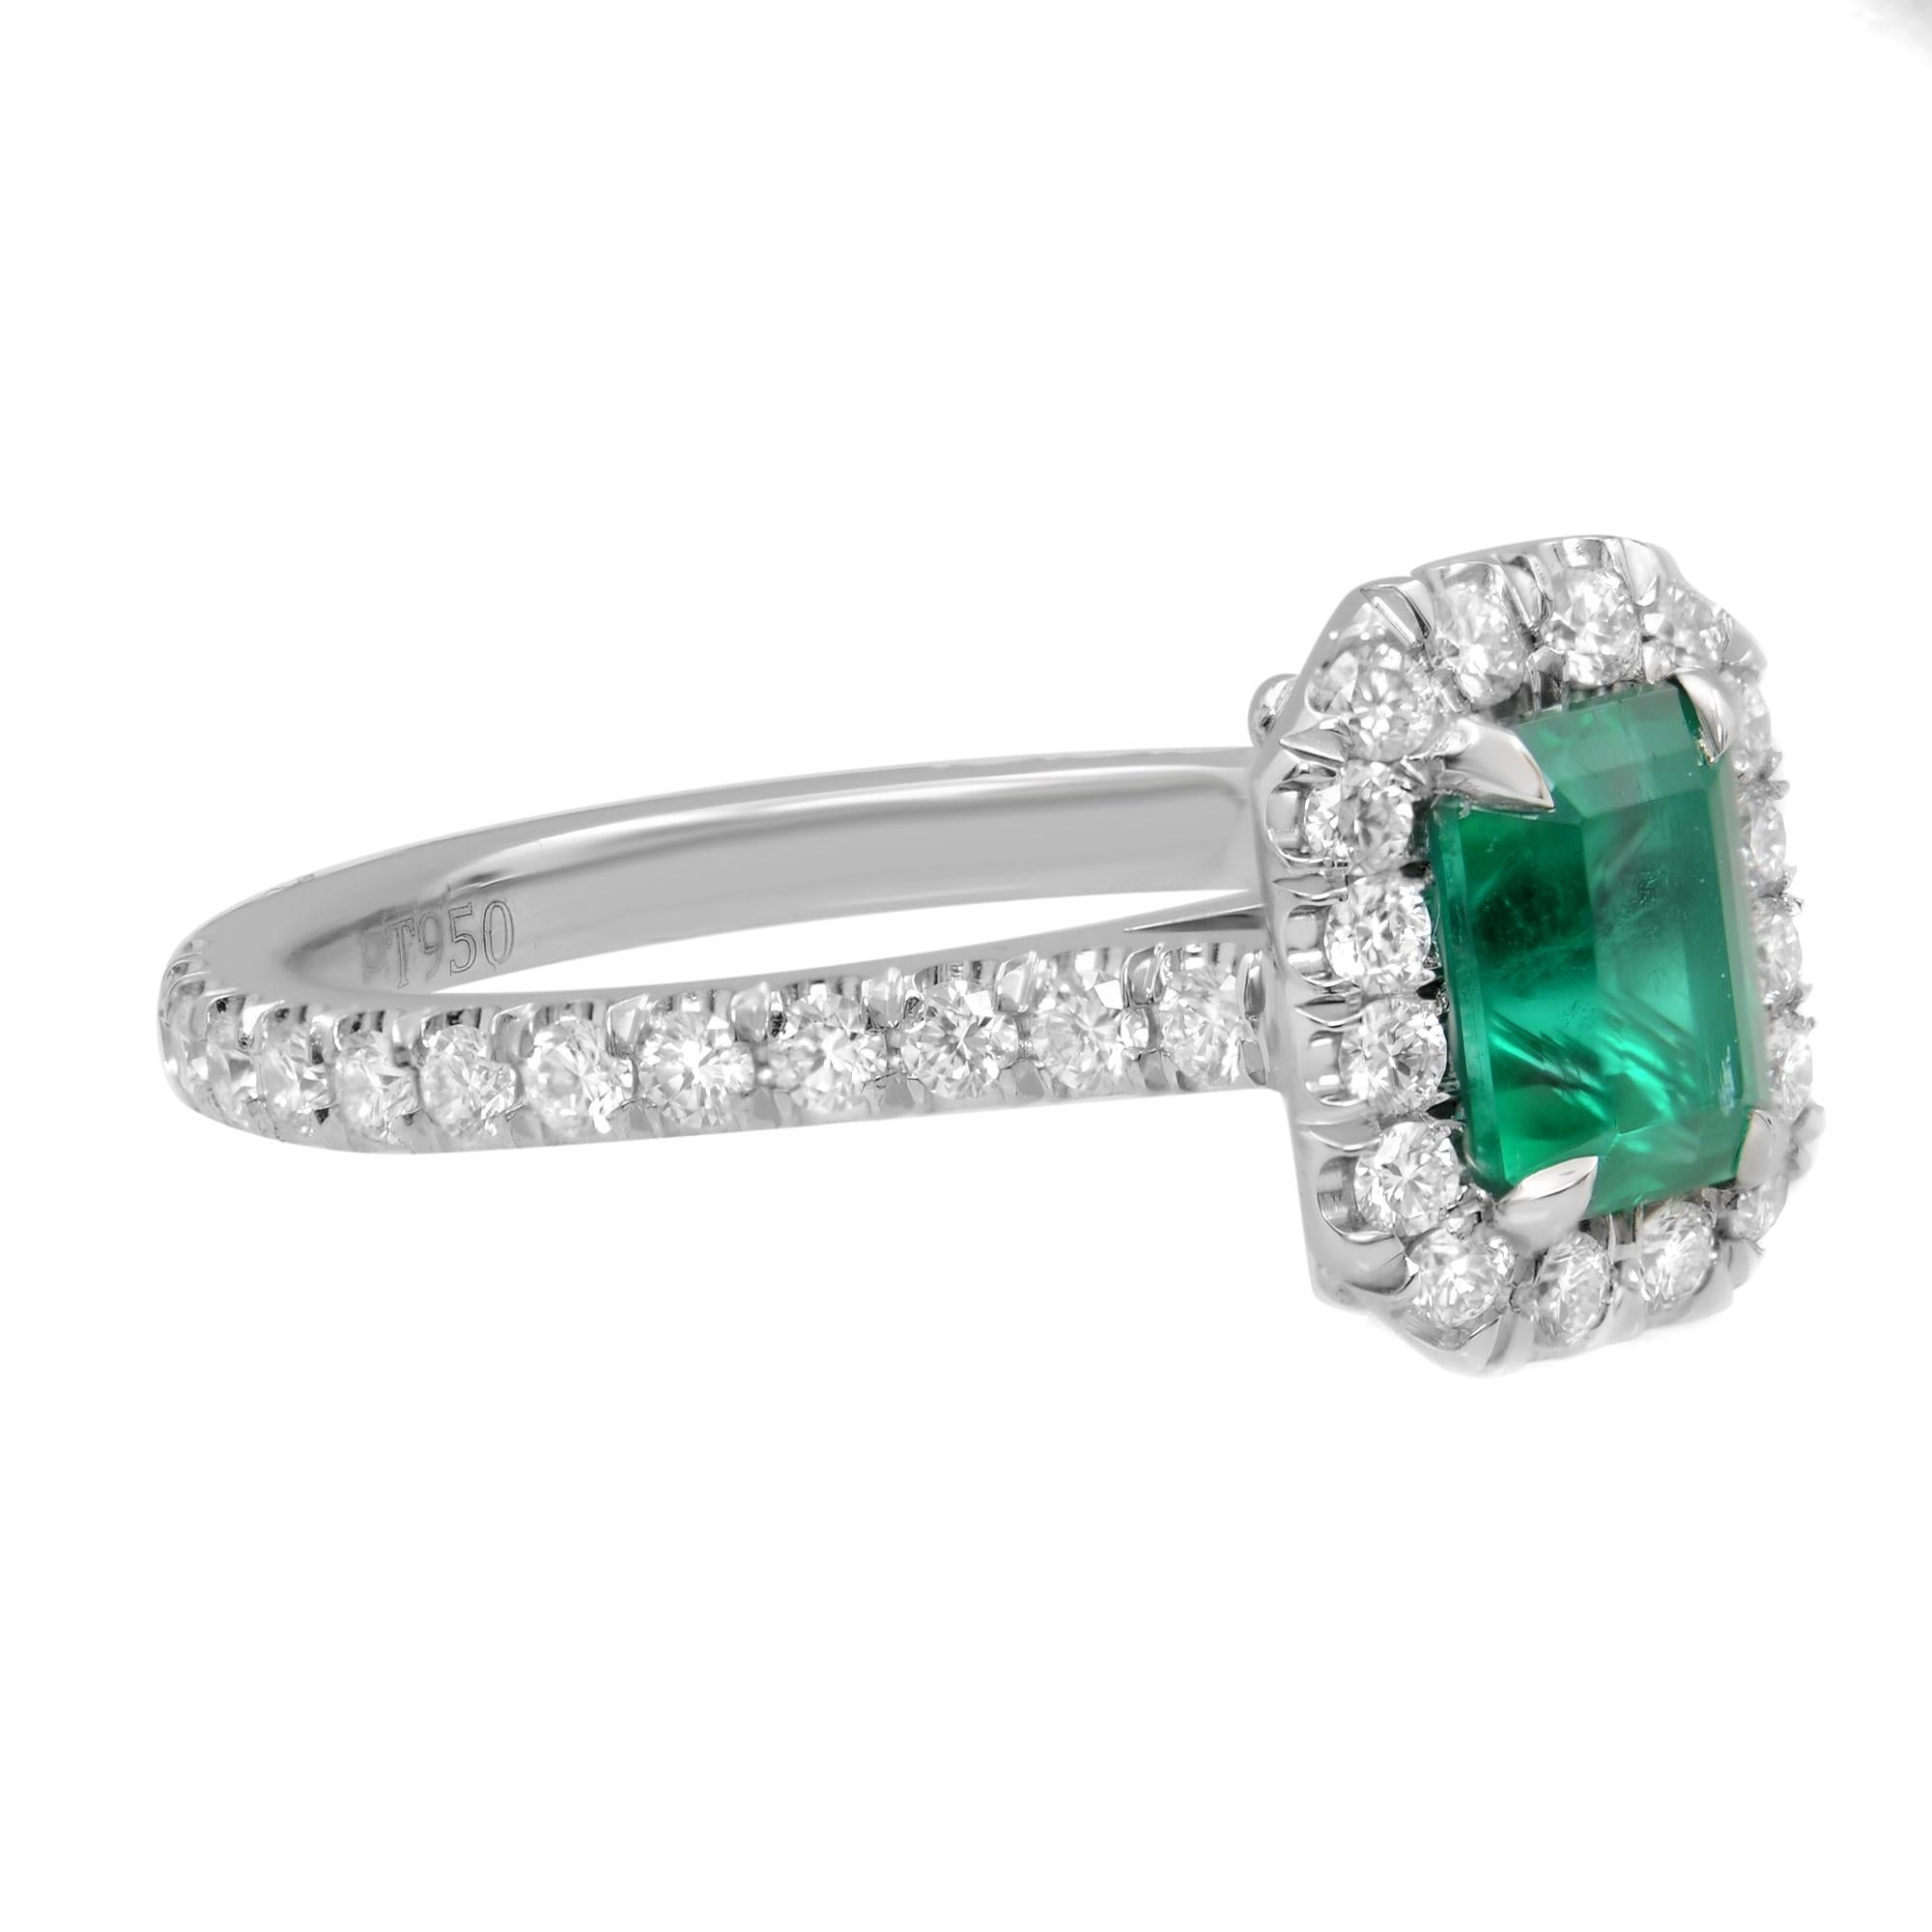 Mounted in a claw setting, 0.90 carat emerald-cut vivid green Colombian emerald that catches attention with its glorious green hue. Center stone is certified.  Diamond accents surround the gem in a sparkling halo and embellish the shank. Diamond